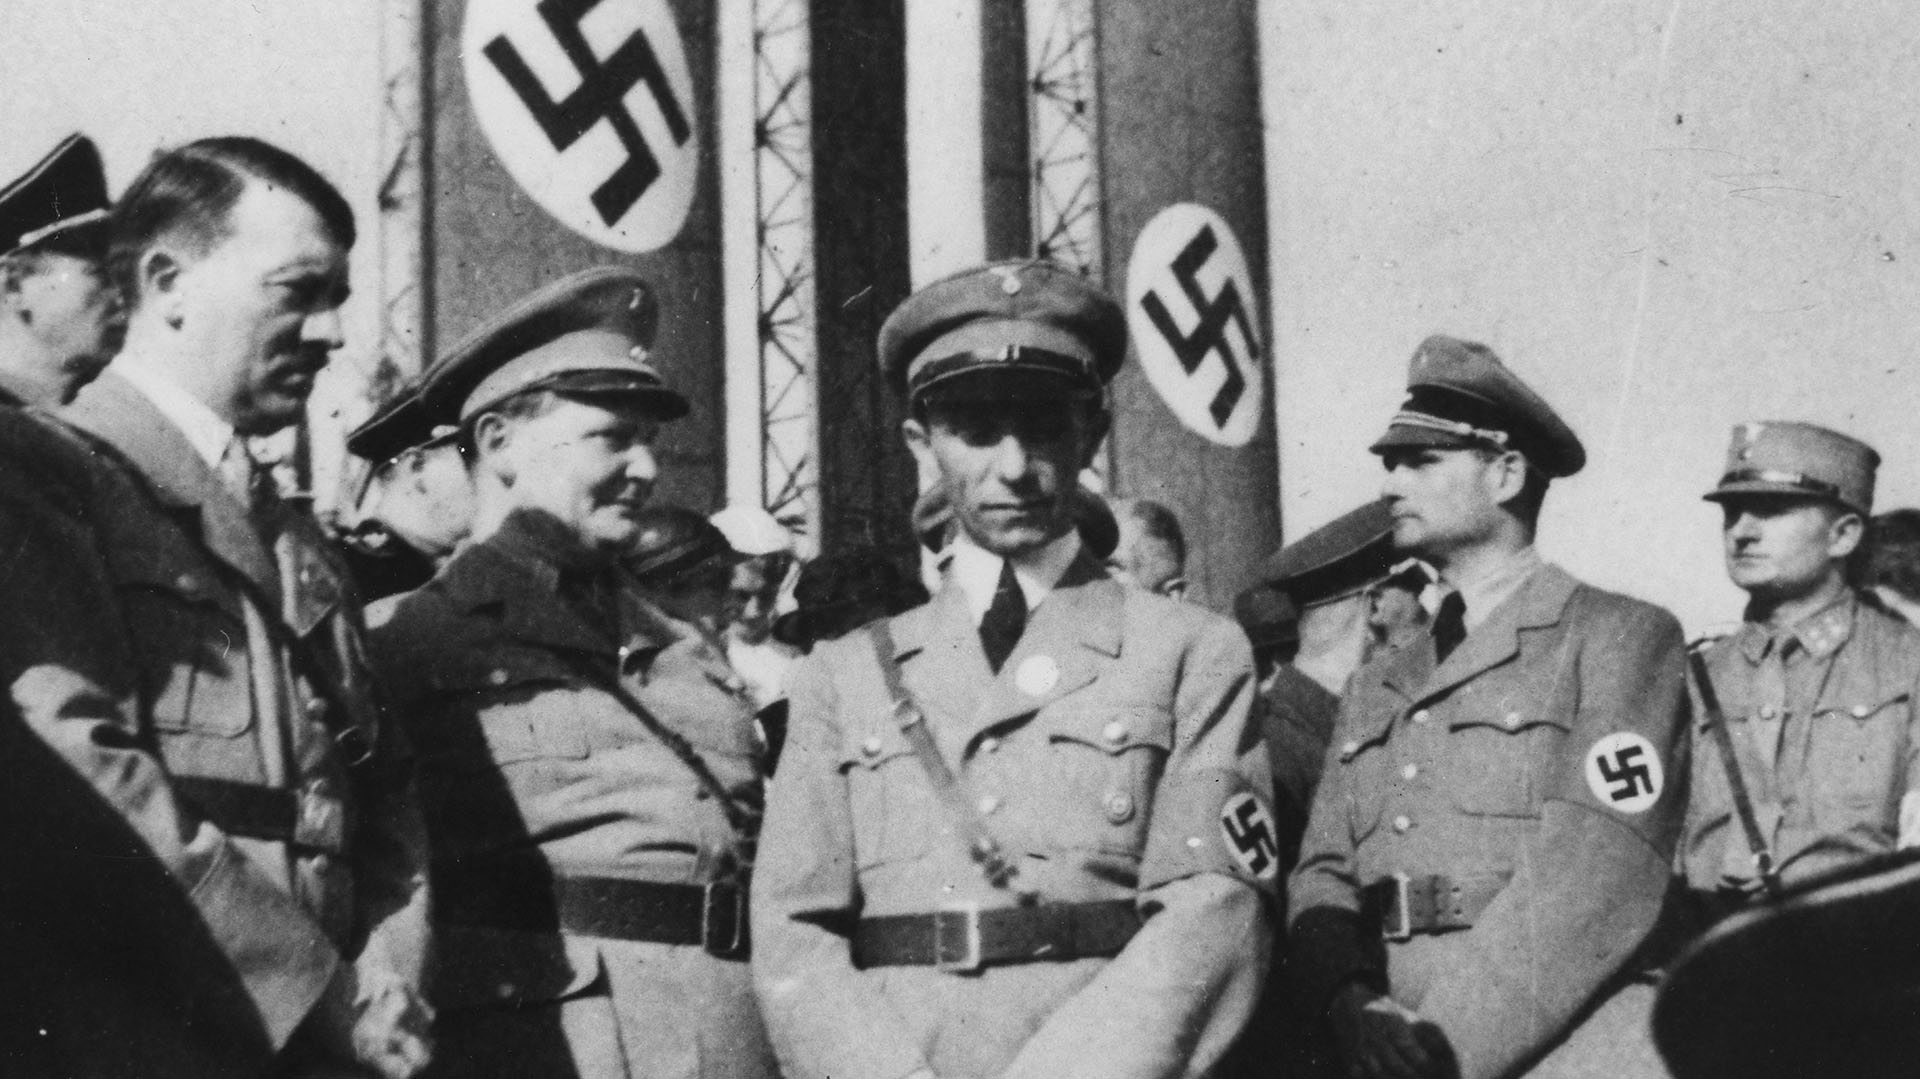 La jerarquía nazi: Hitler, Goering, Goebbels (en el centro) y Hess. 
(National Archives and Records Administration/Wikimedia Commons)